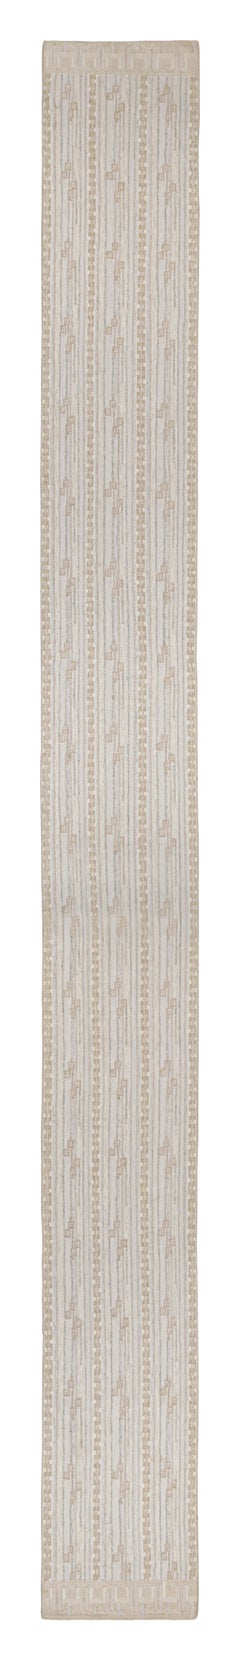 Rug & Kilim’s Scandinavian Style Kilim in Silver with Geometric Patterns